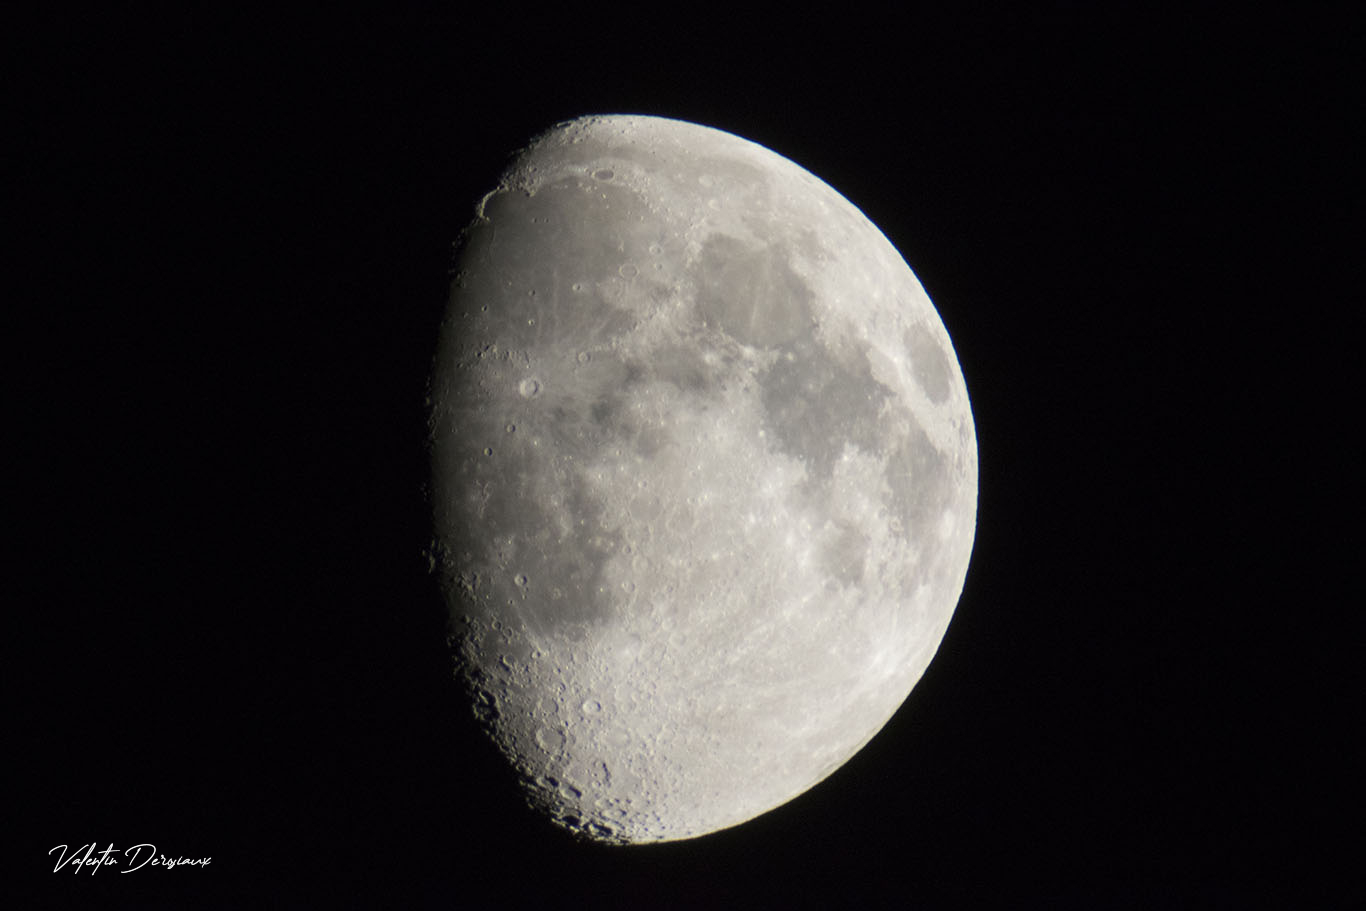 Lune (67% visible)